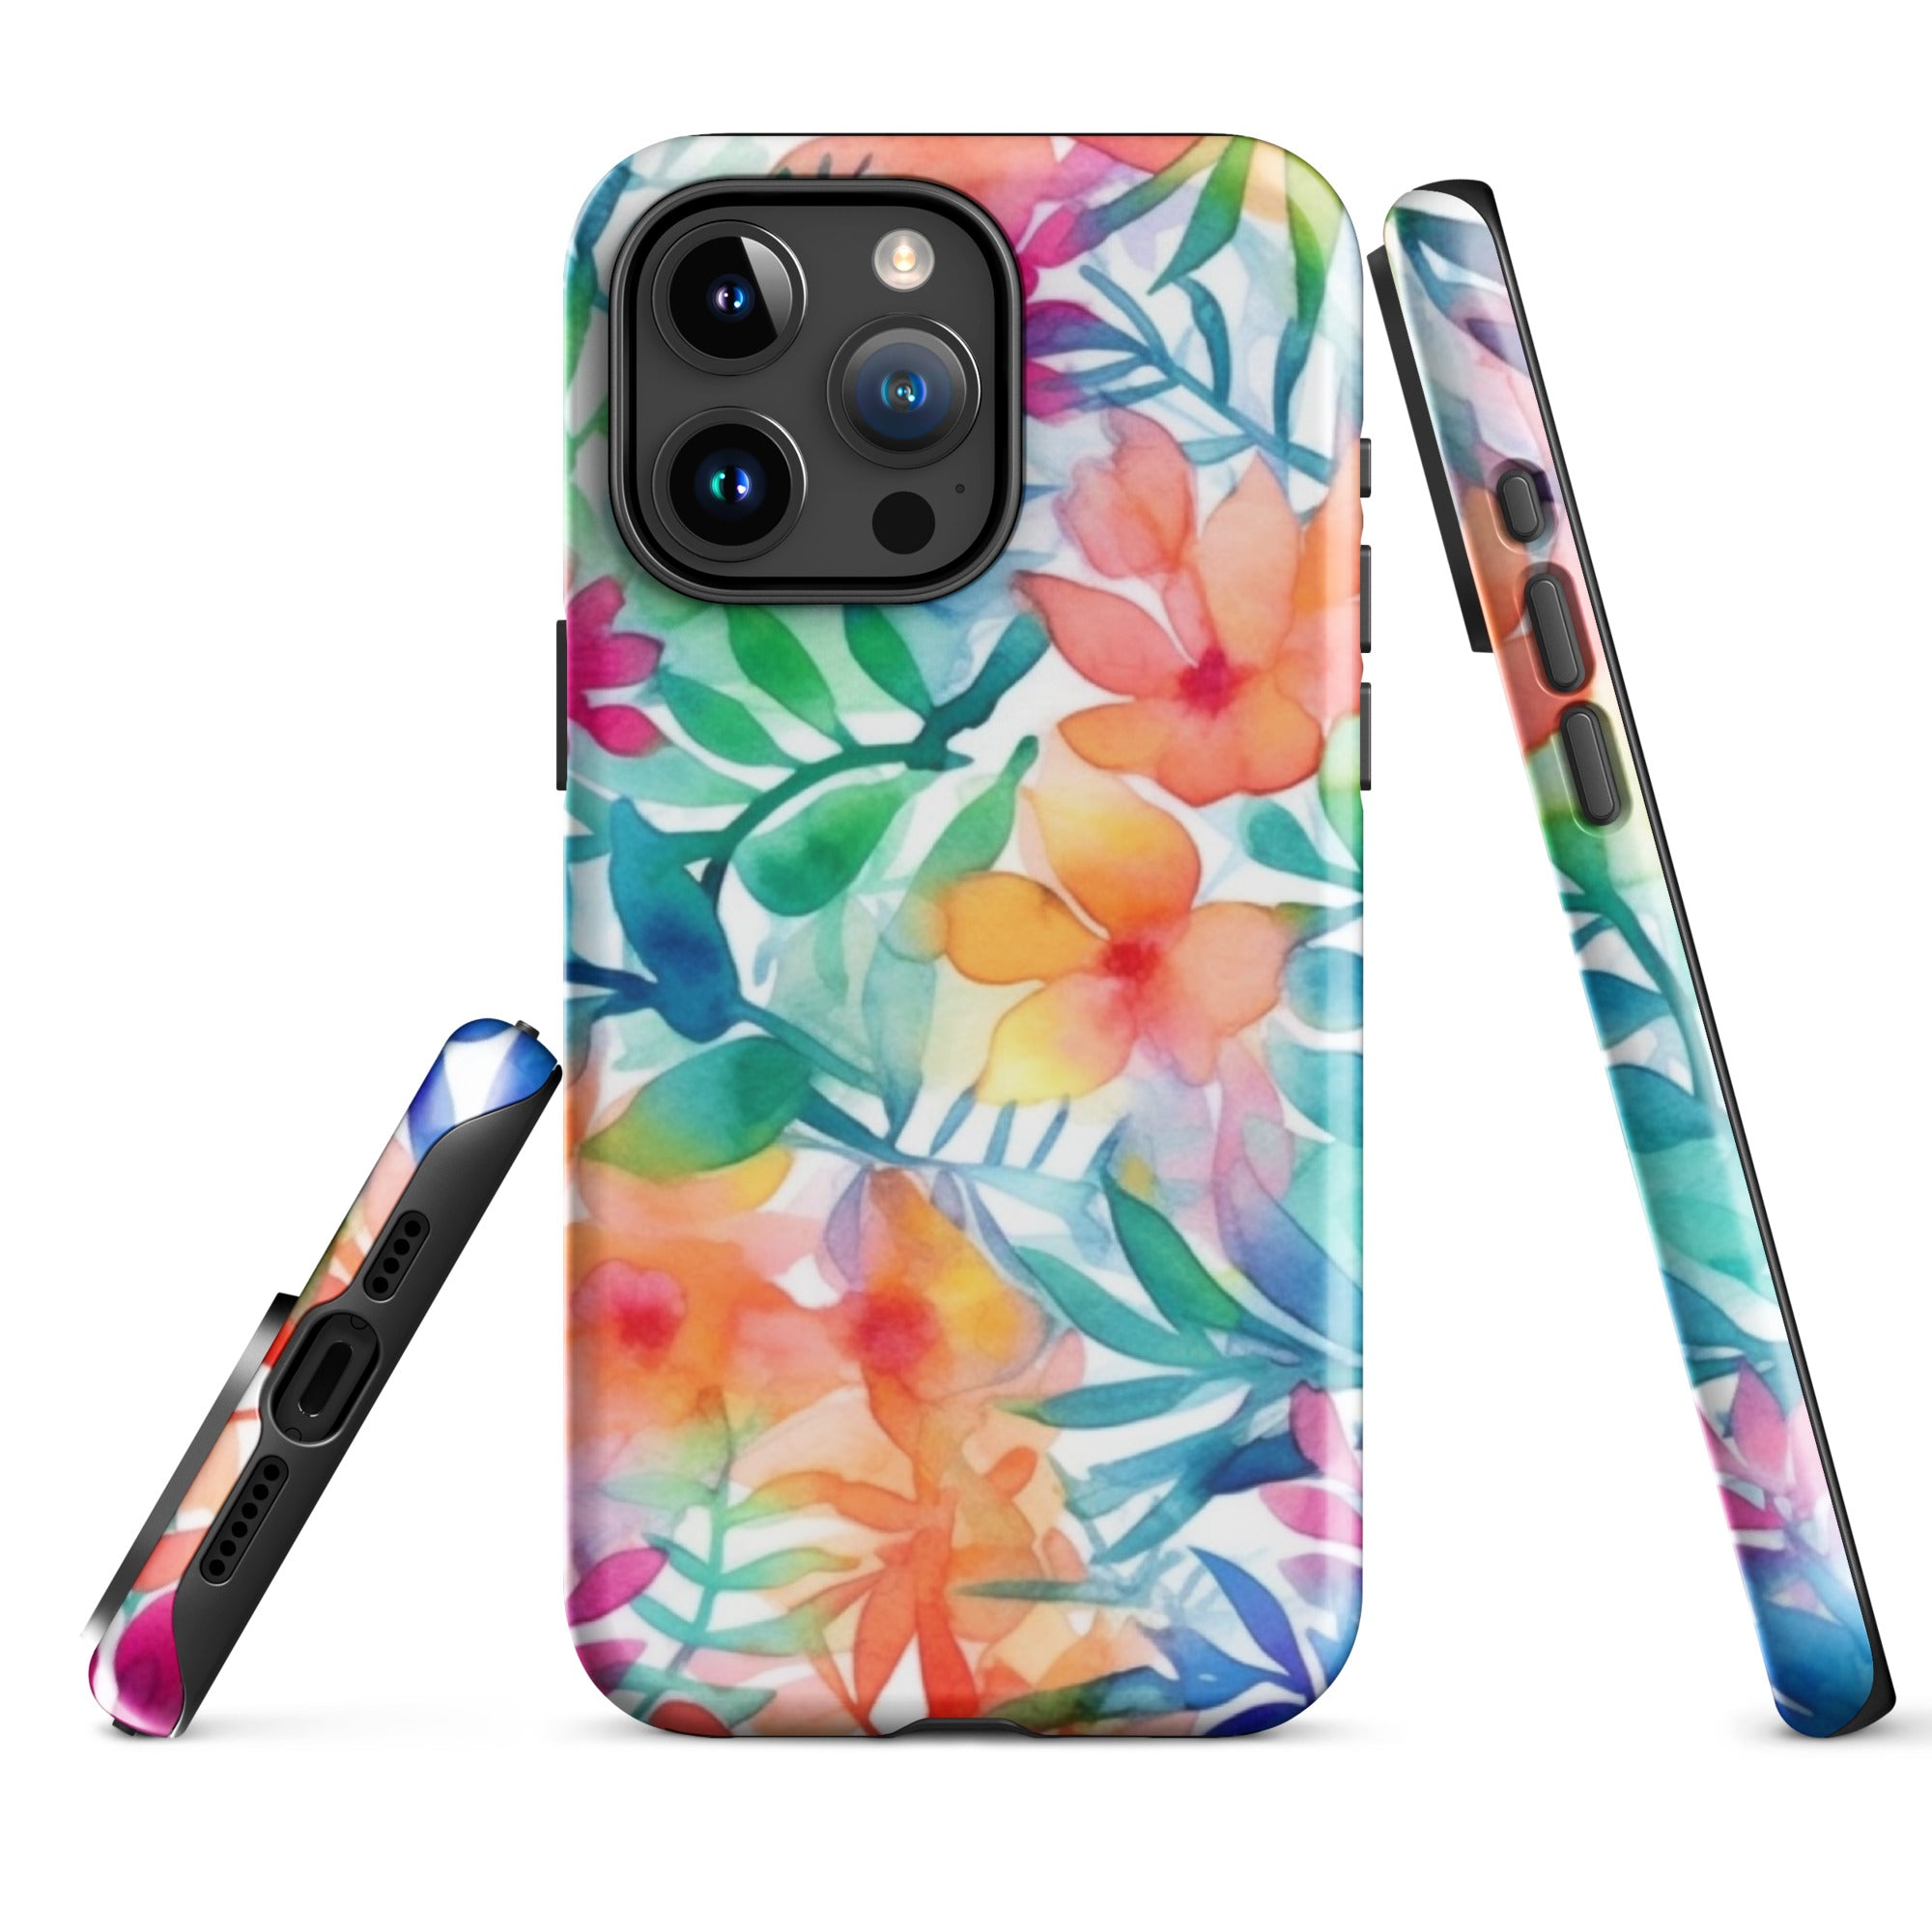 Tough Case for iPhone - Floral